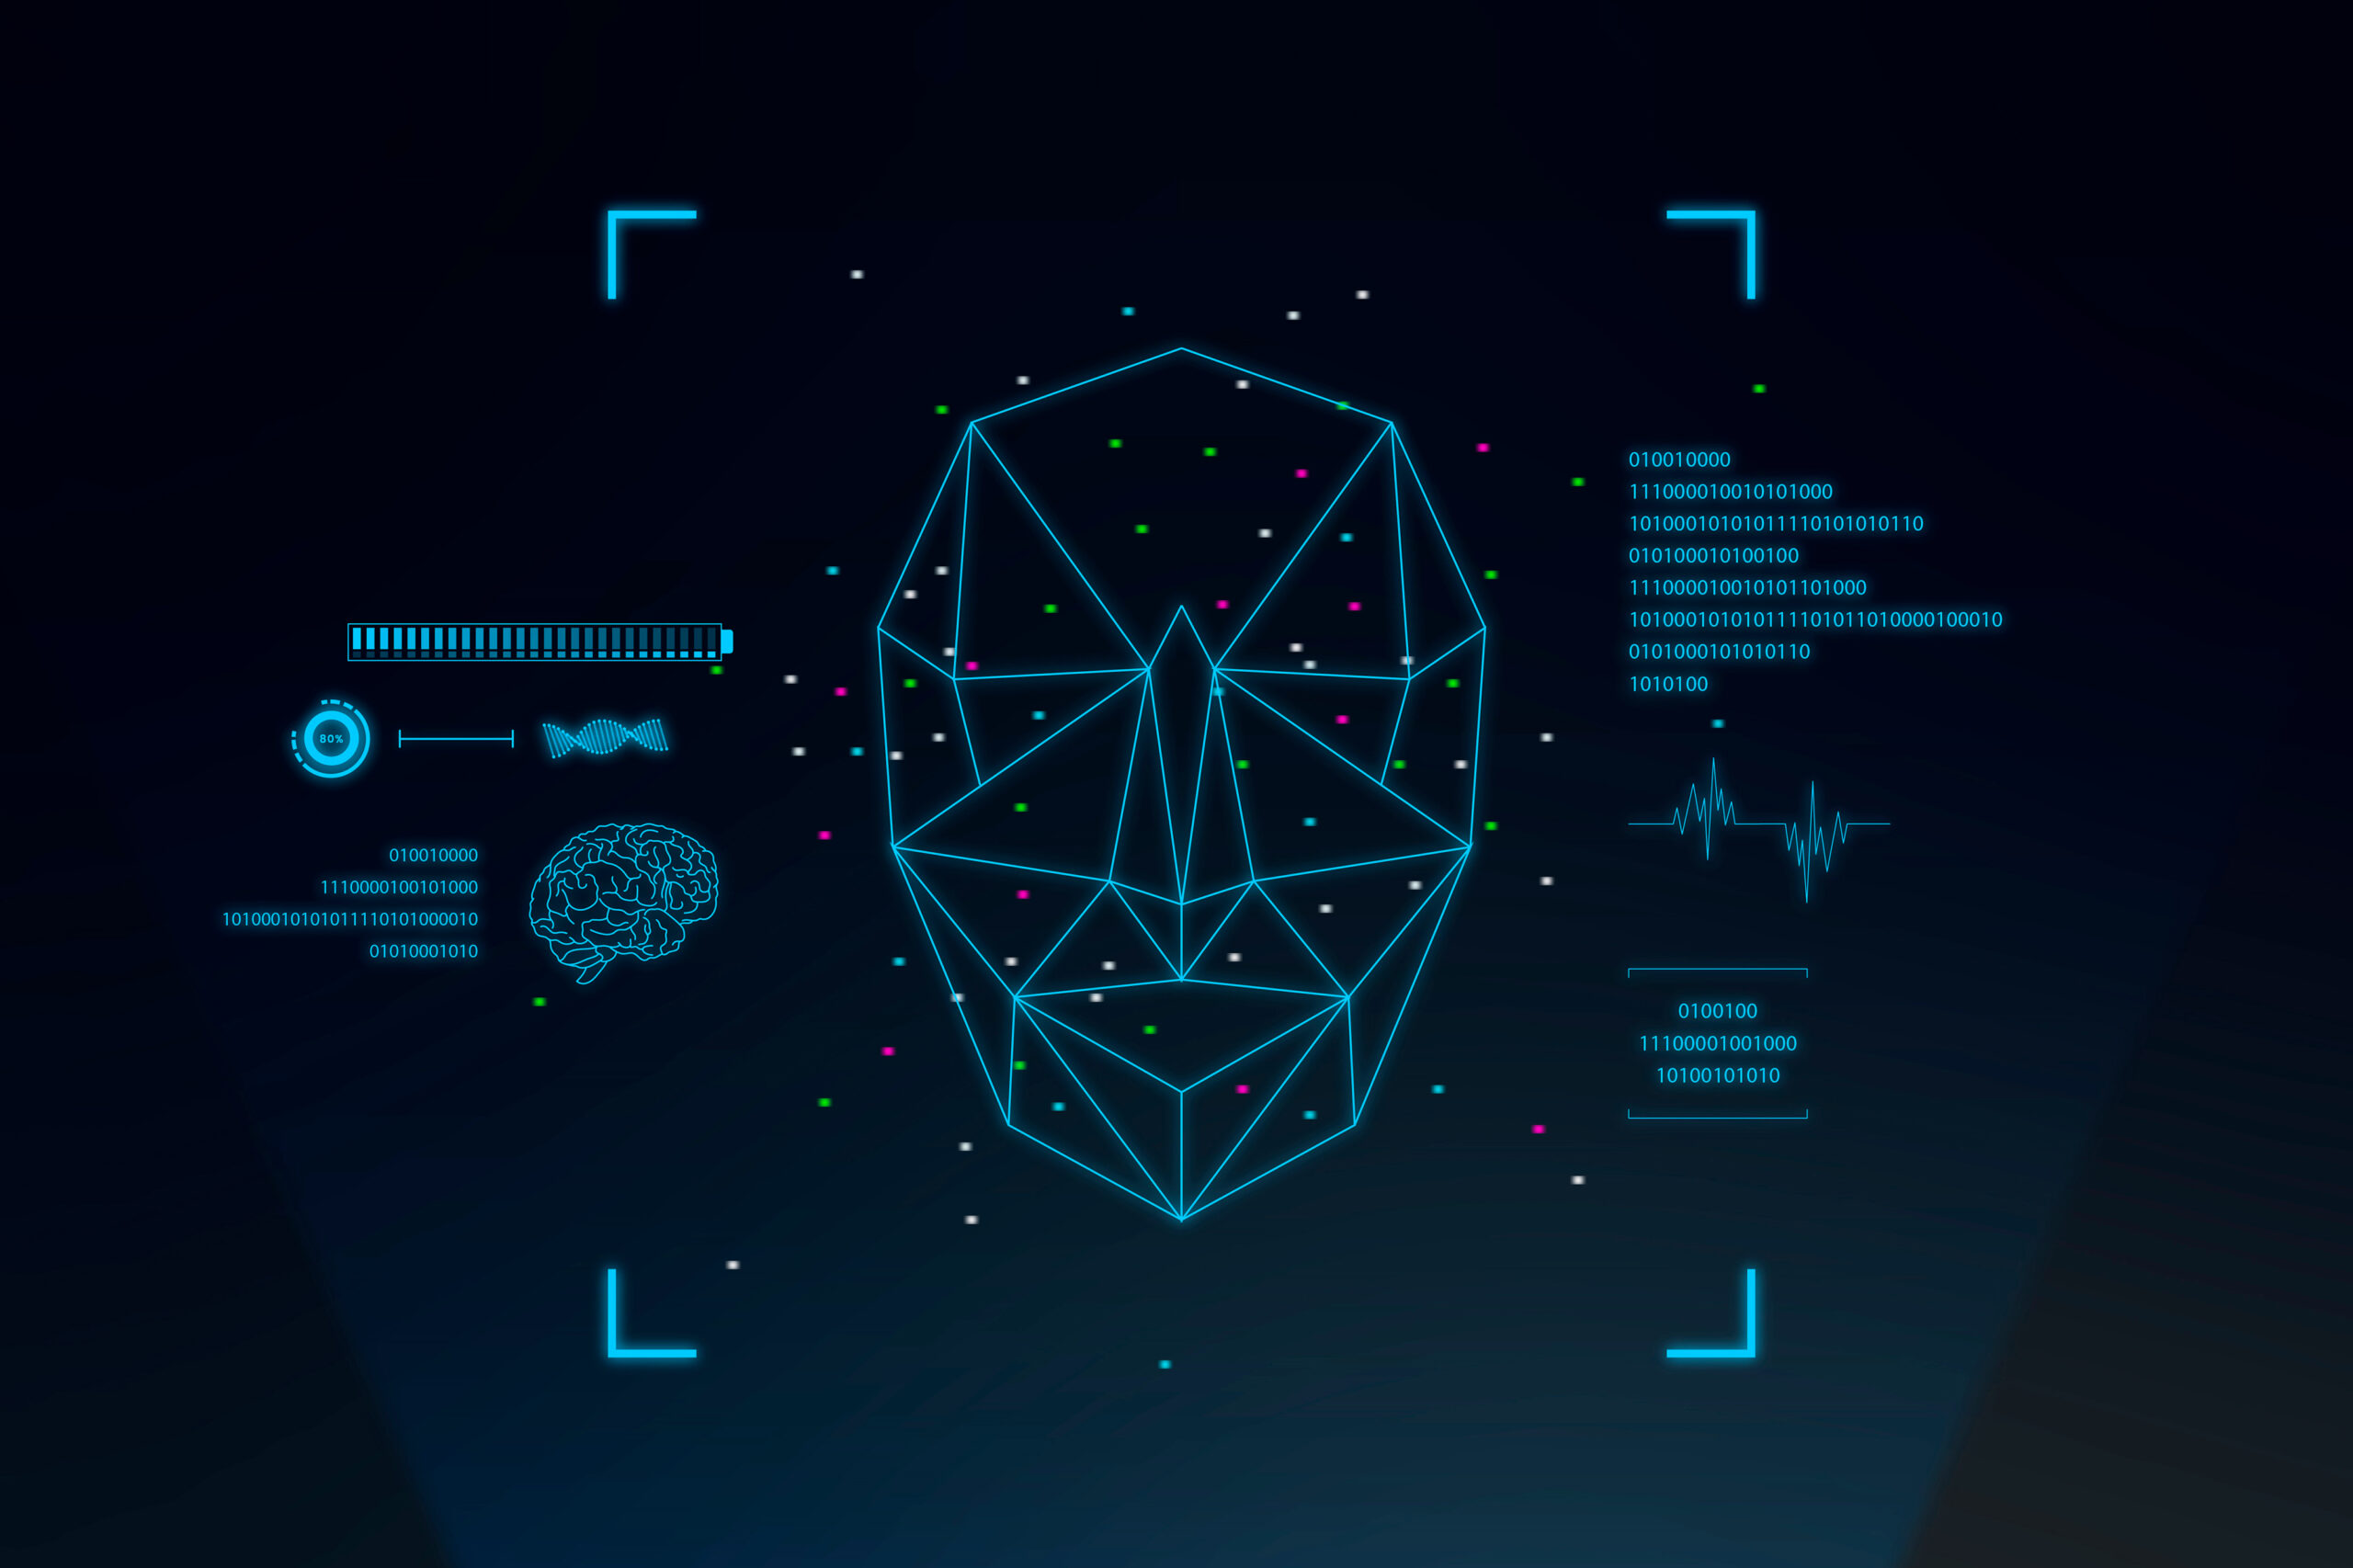 Detroit Implements New Limits on Police Use of Facial Recognition Technology